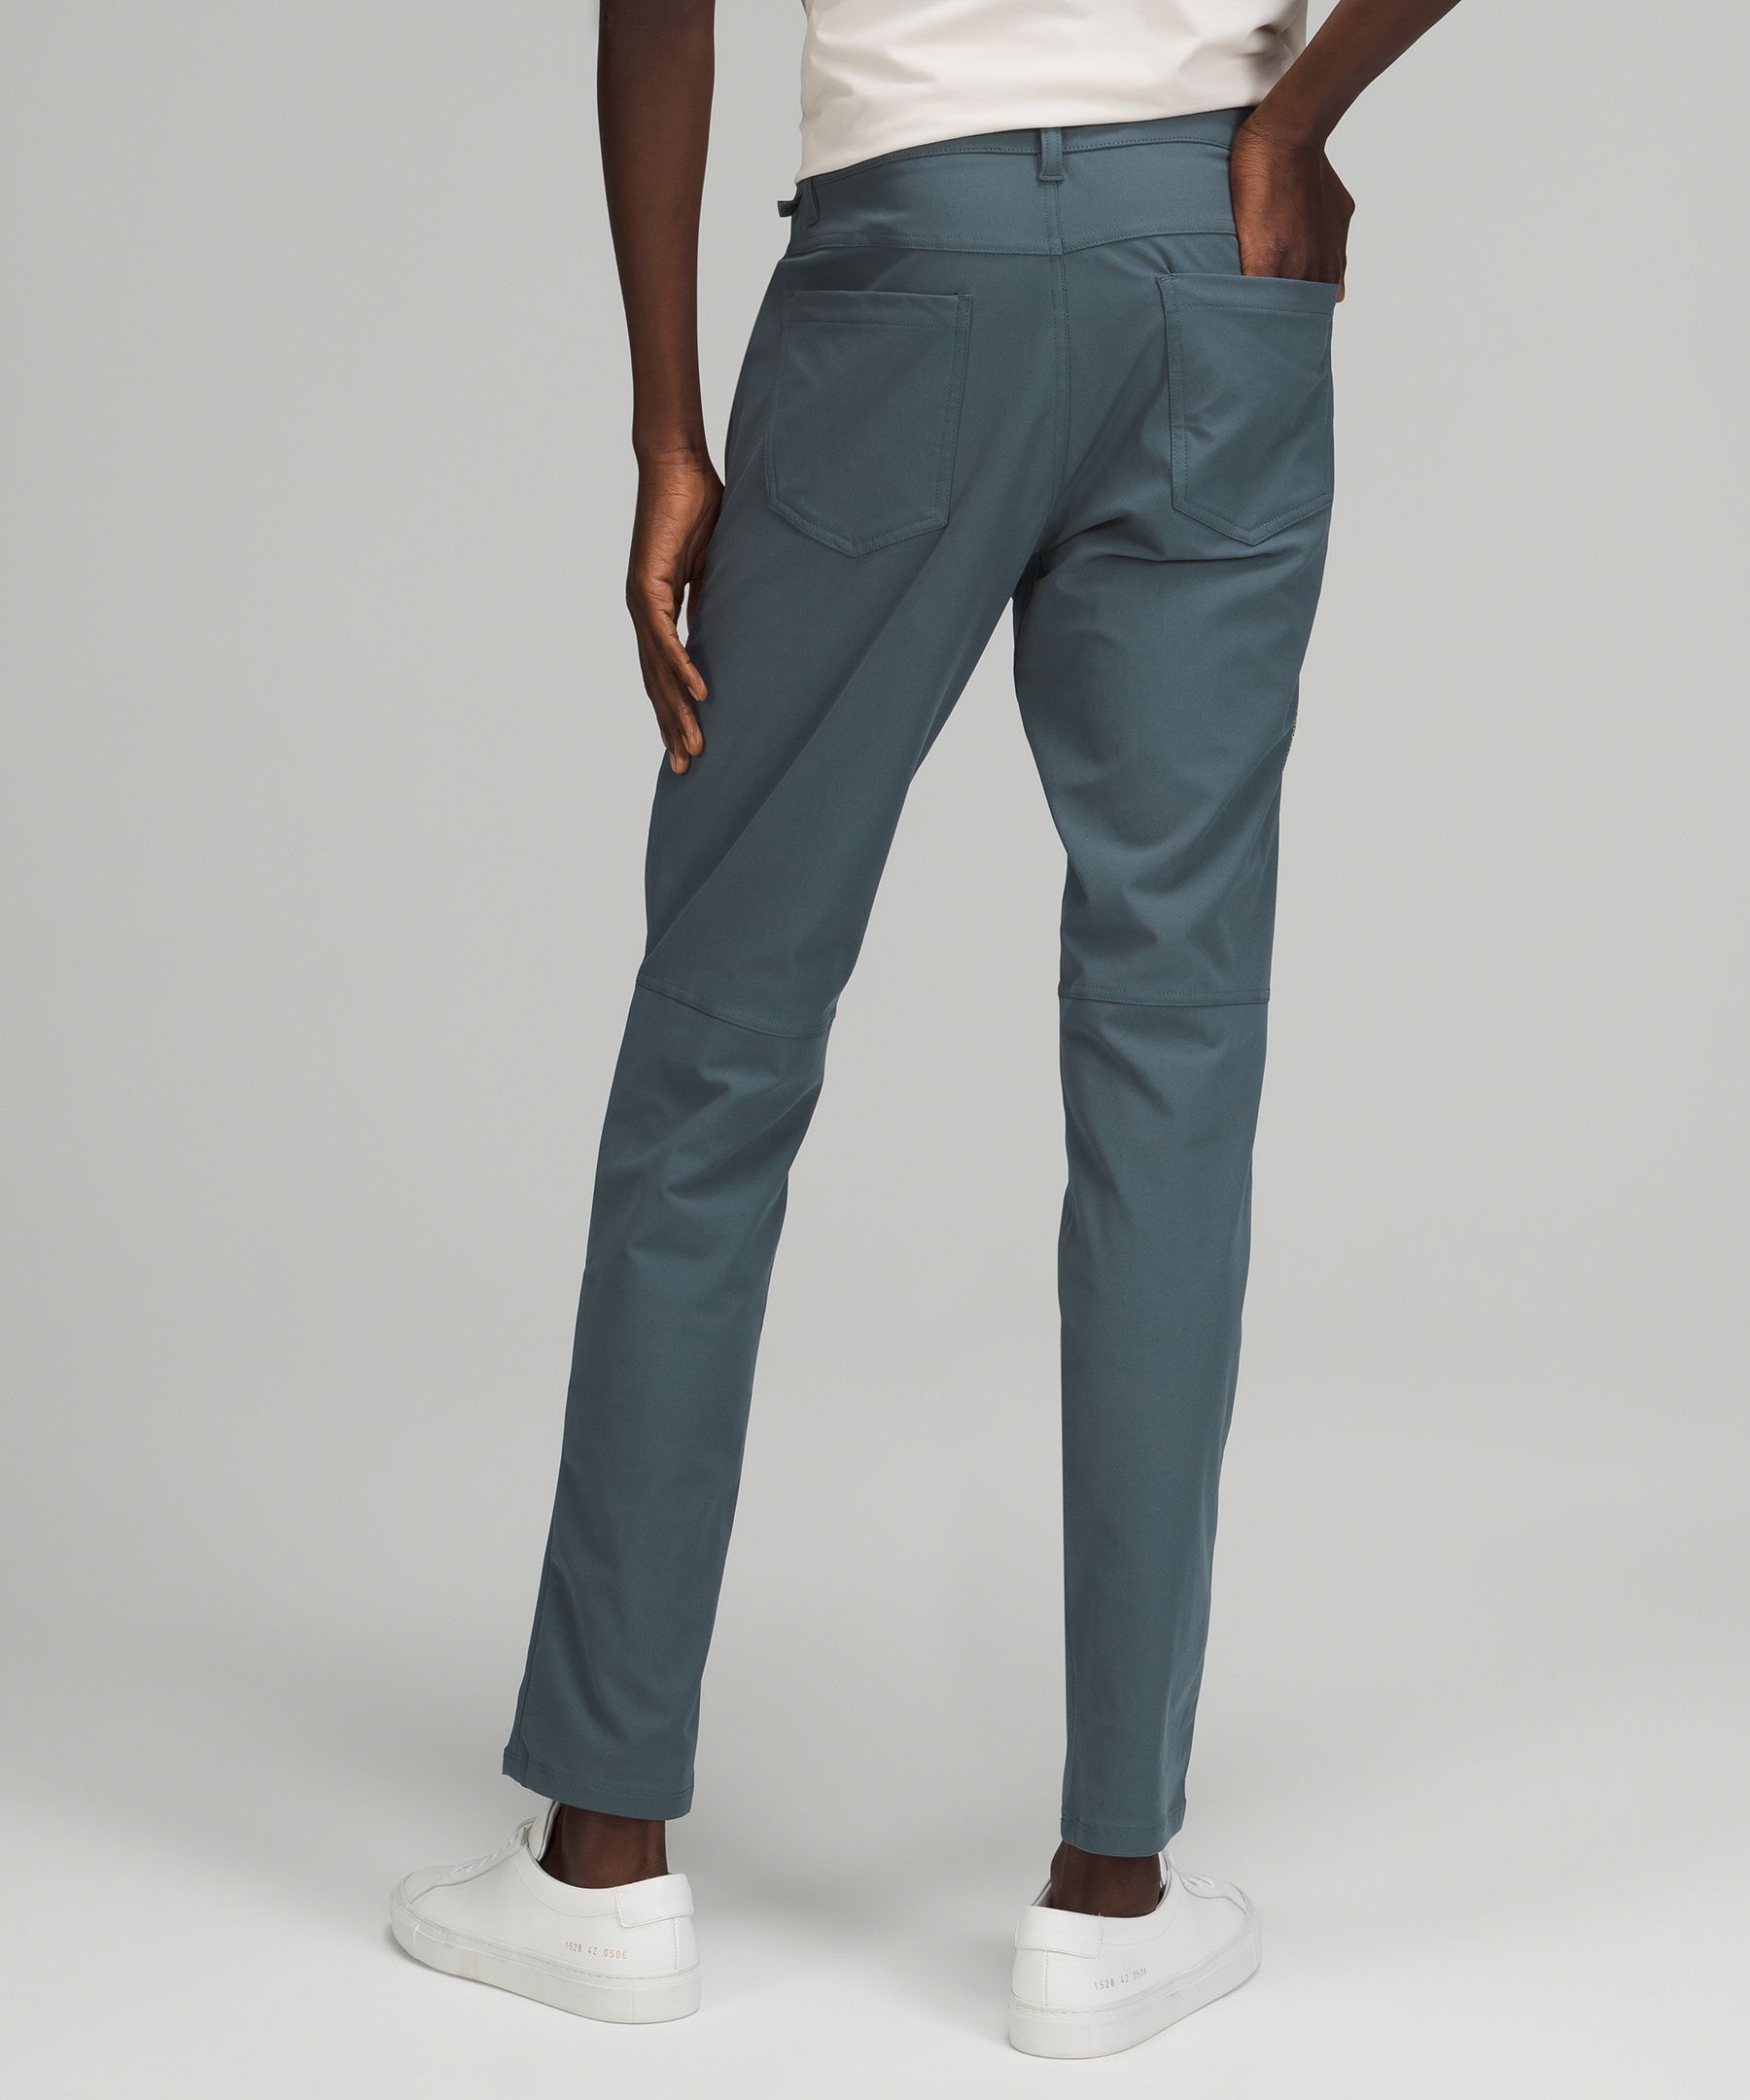 5 lululemon ABC Pants Outfits to Wear Now - Men's Casual Style